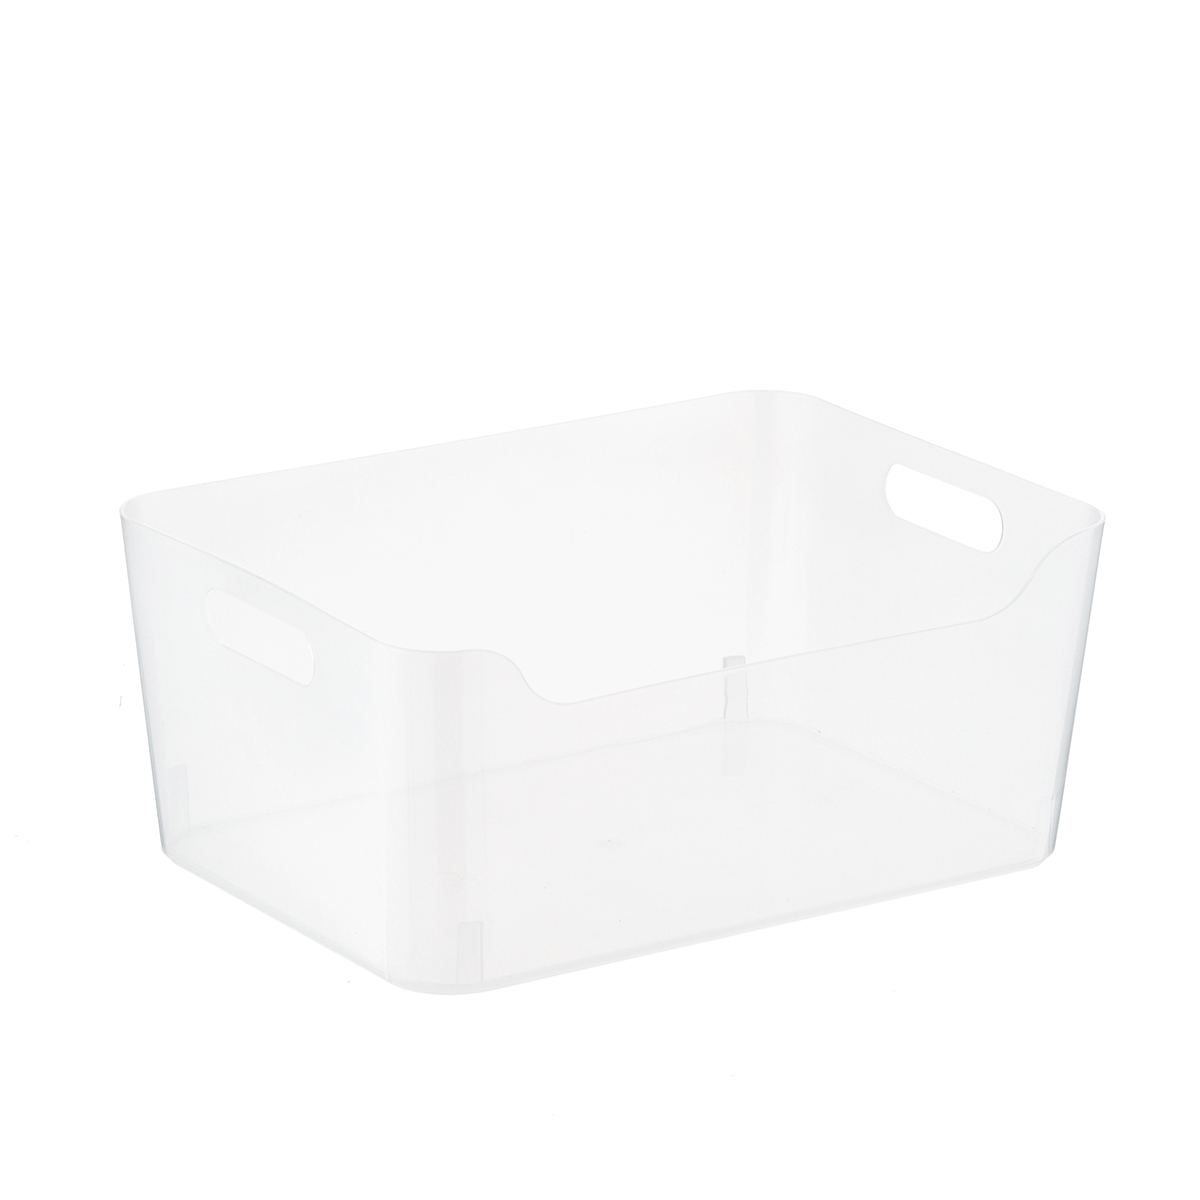 https://www.containerstore.com/catalogimages/339922/10073990-plastic-storage-bin-with-ha.jpg